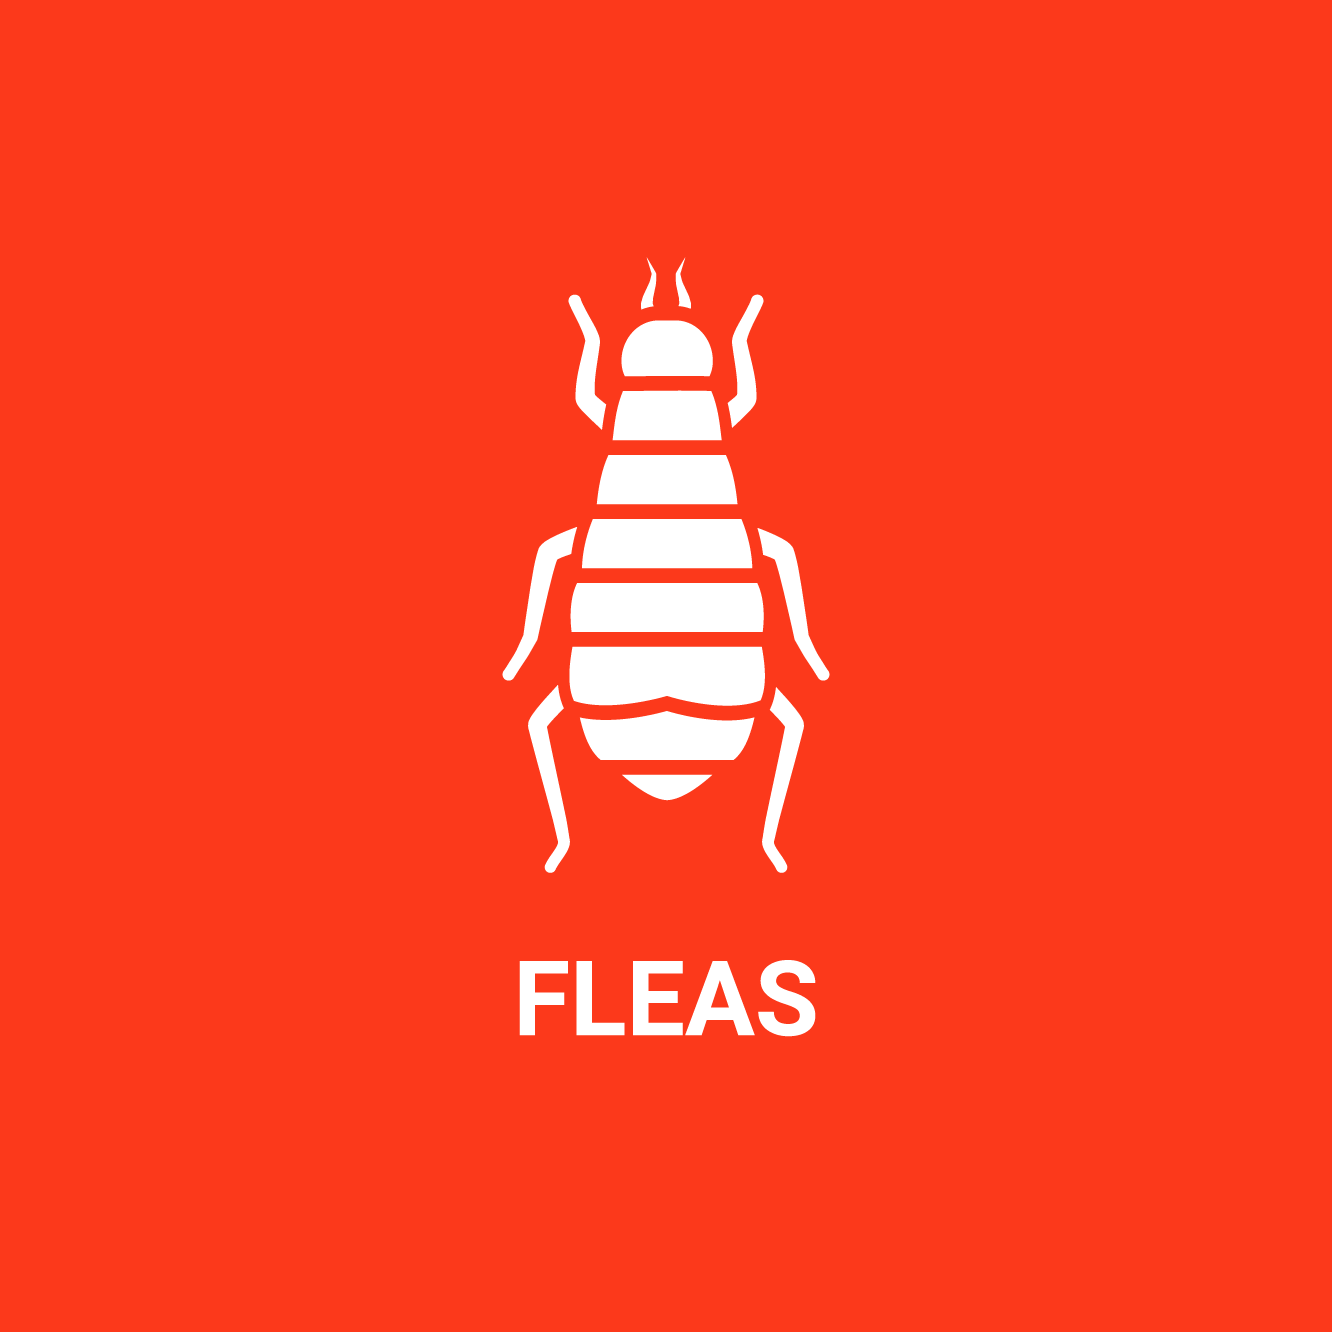 A white flea icon on a red background.